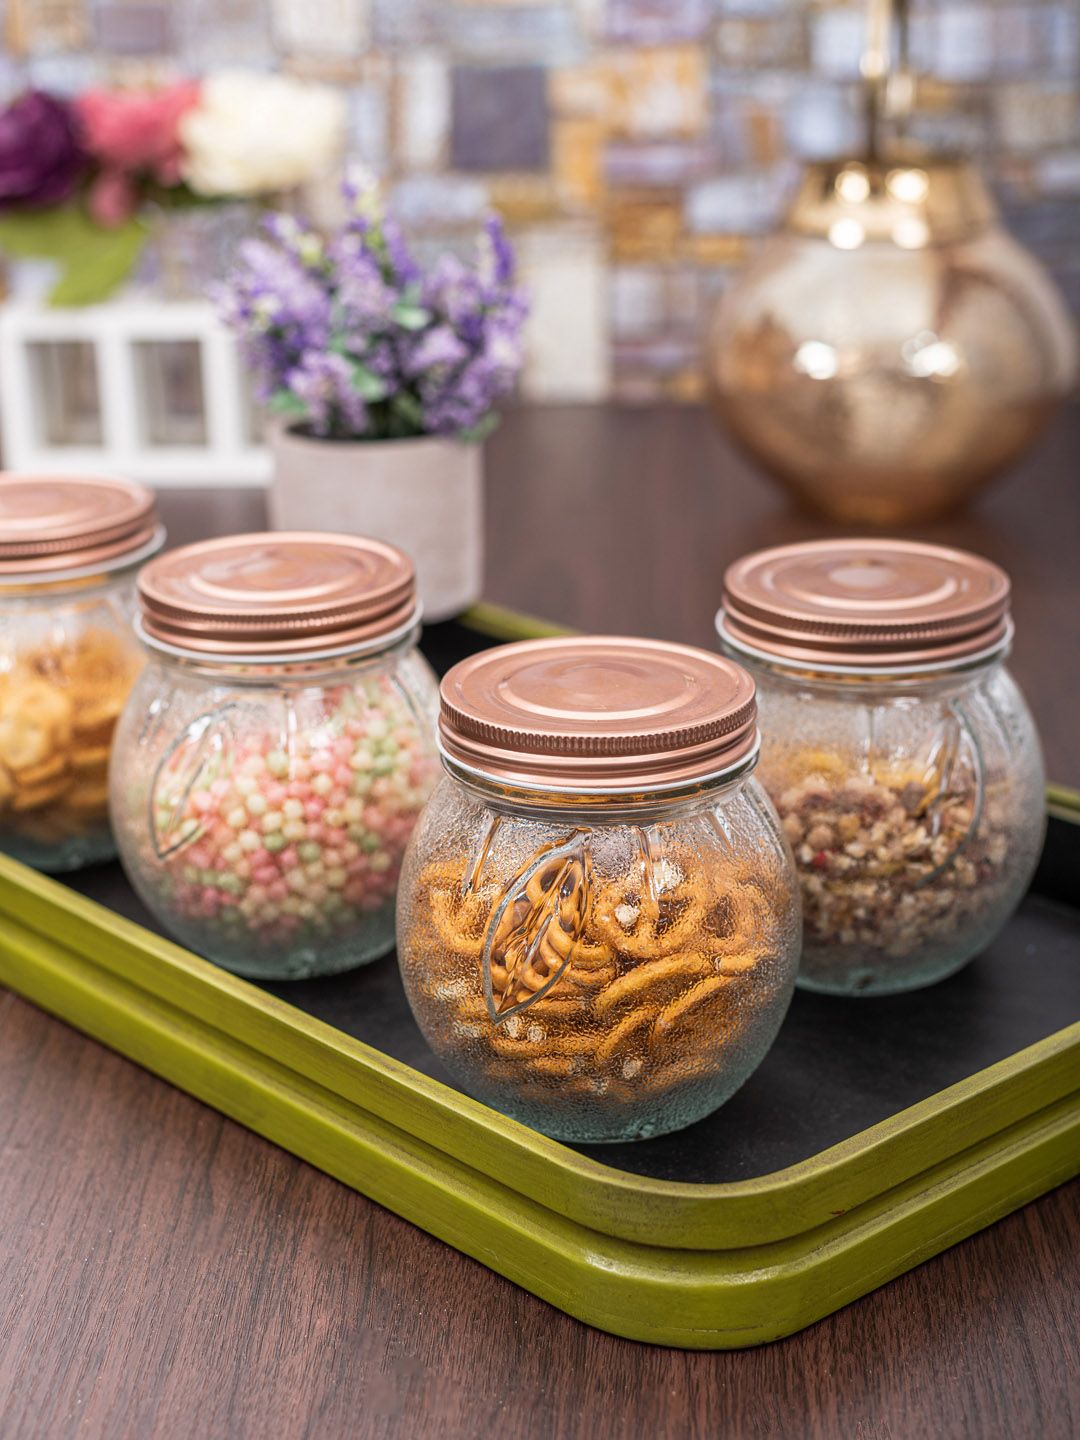 White Gold Set Of 4 Transparent Solid Glass Storage Jars With Rose Gold-Toned Lids Price in India